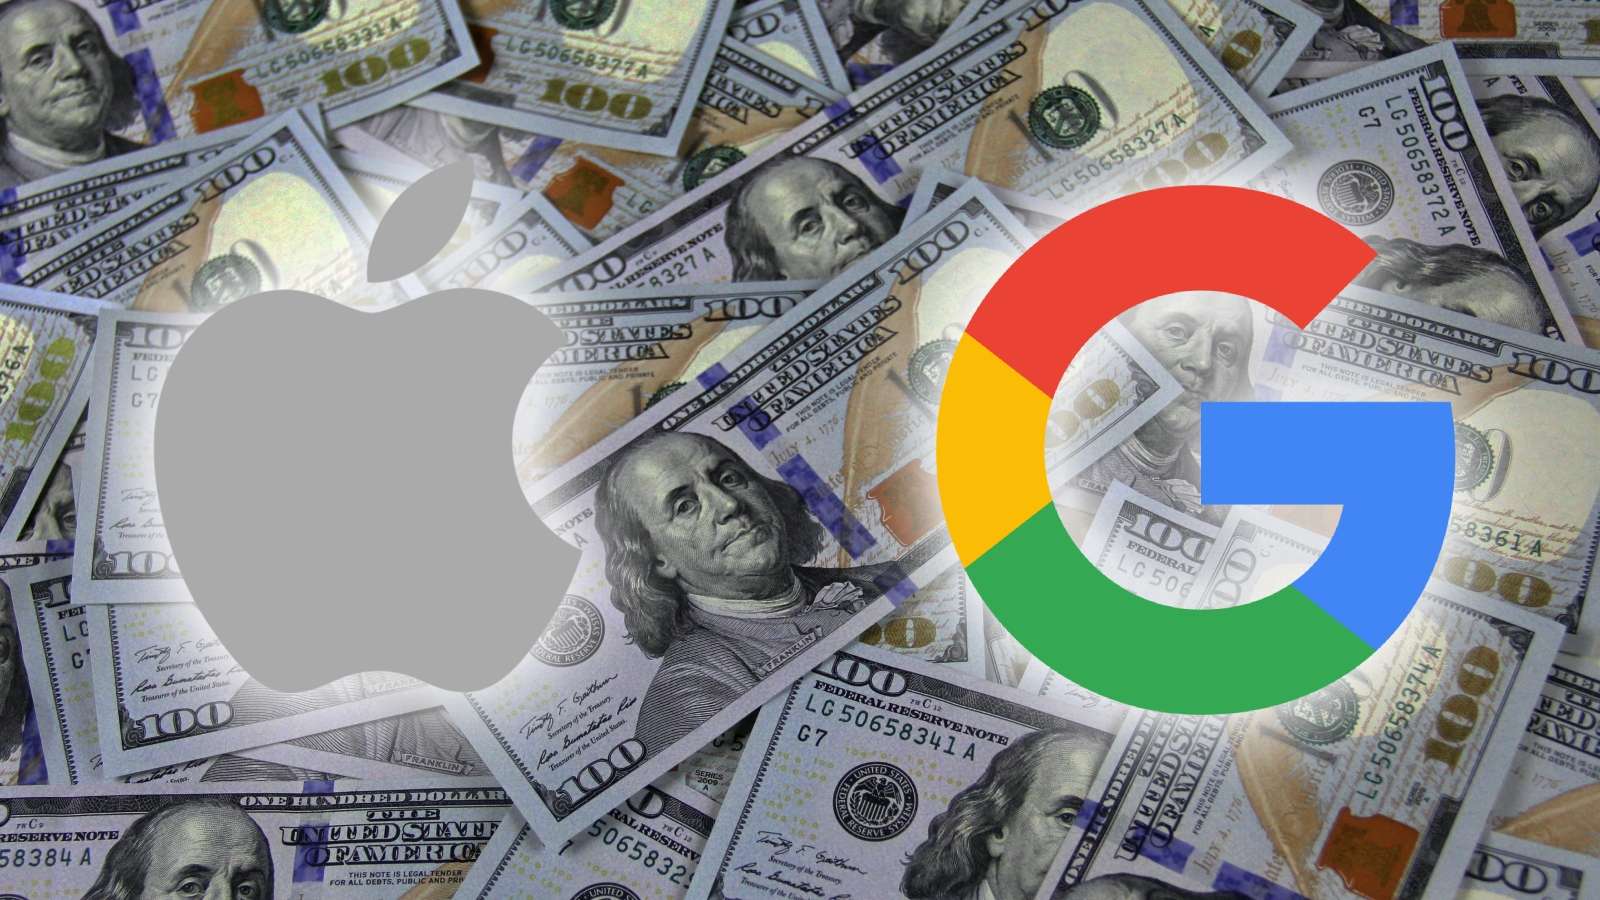 Apple and google logo on a background of USD